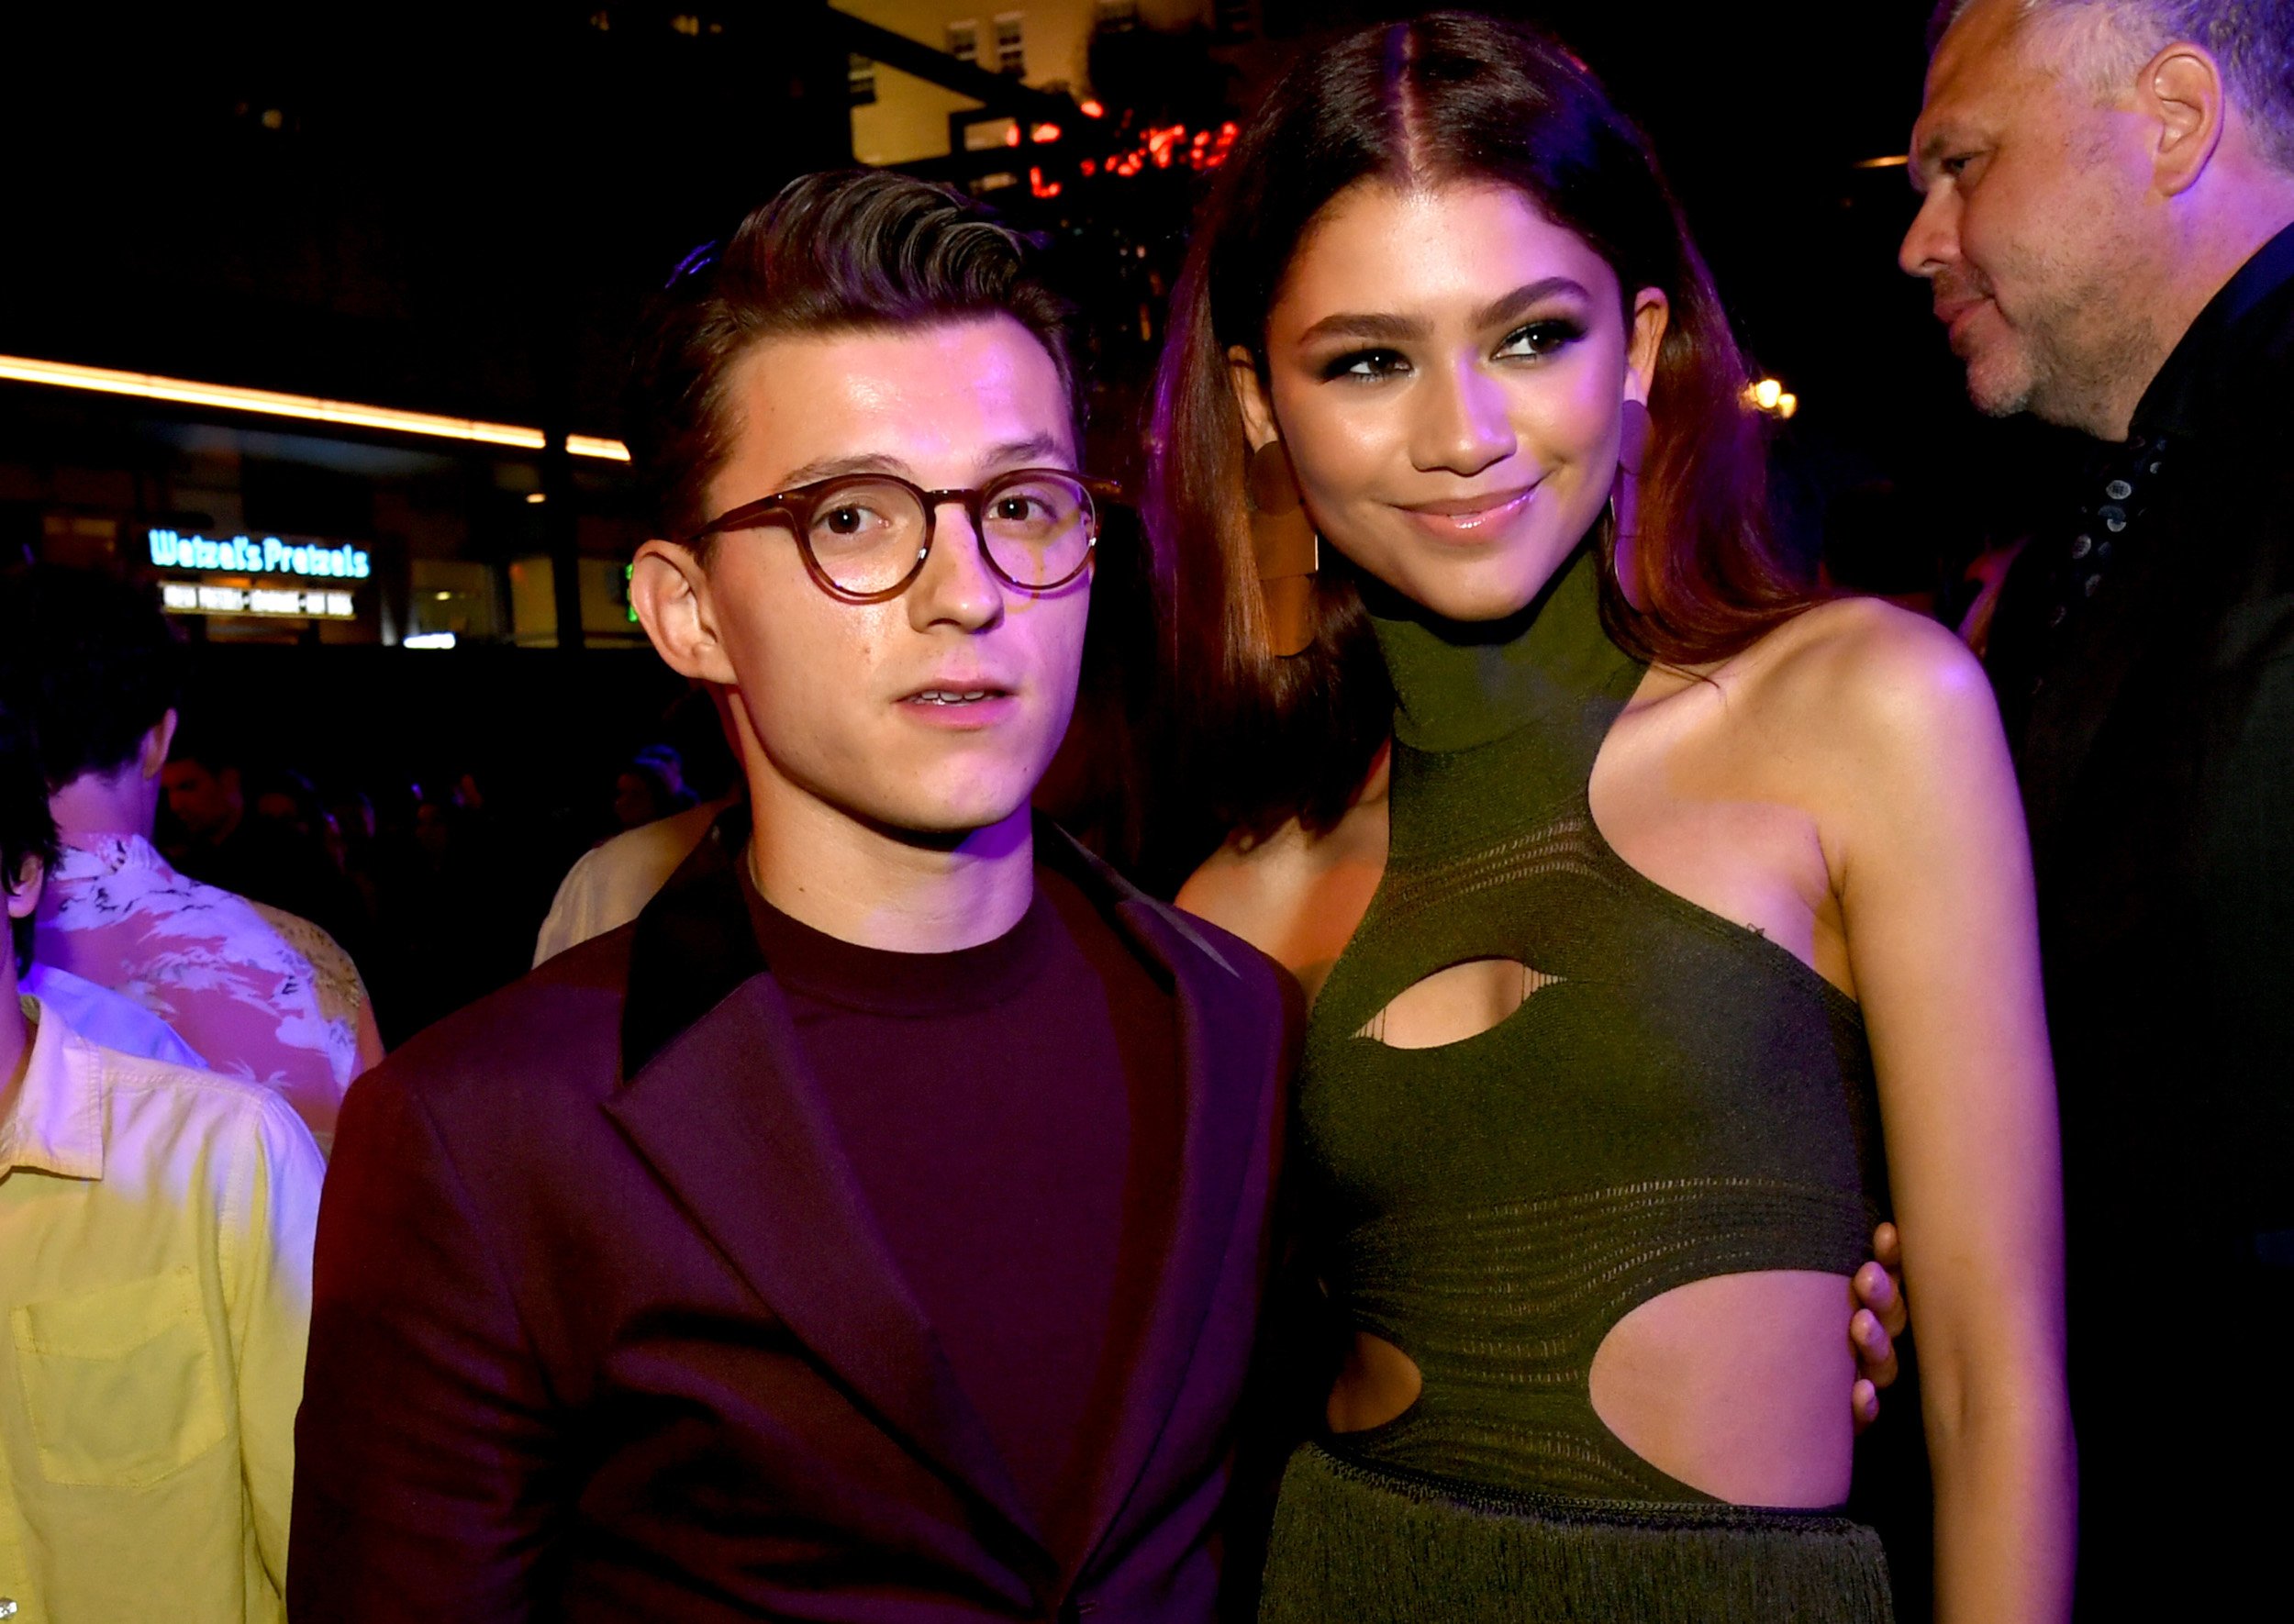 'Spider-Man: No Way Home' stars Tom Holland and Zendaya wearing a brown suit and green dress, respectively